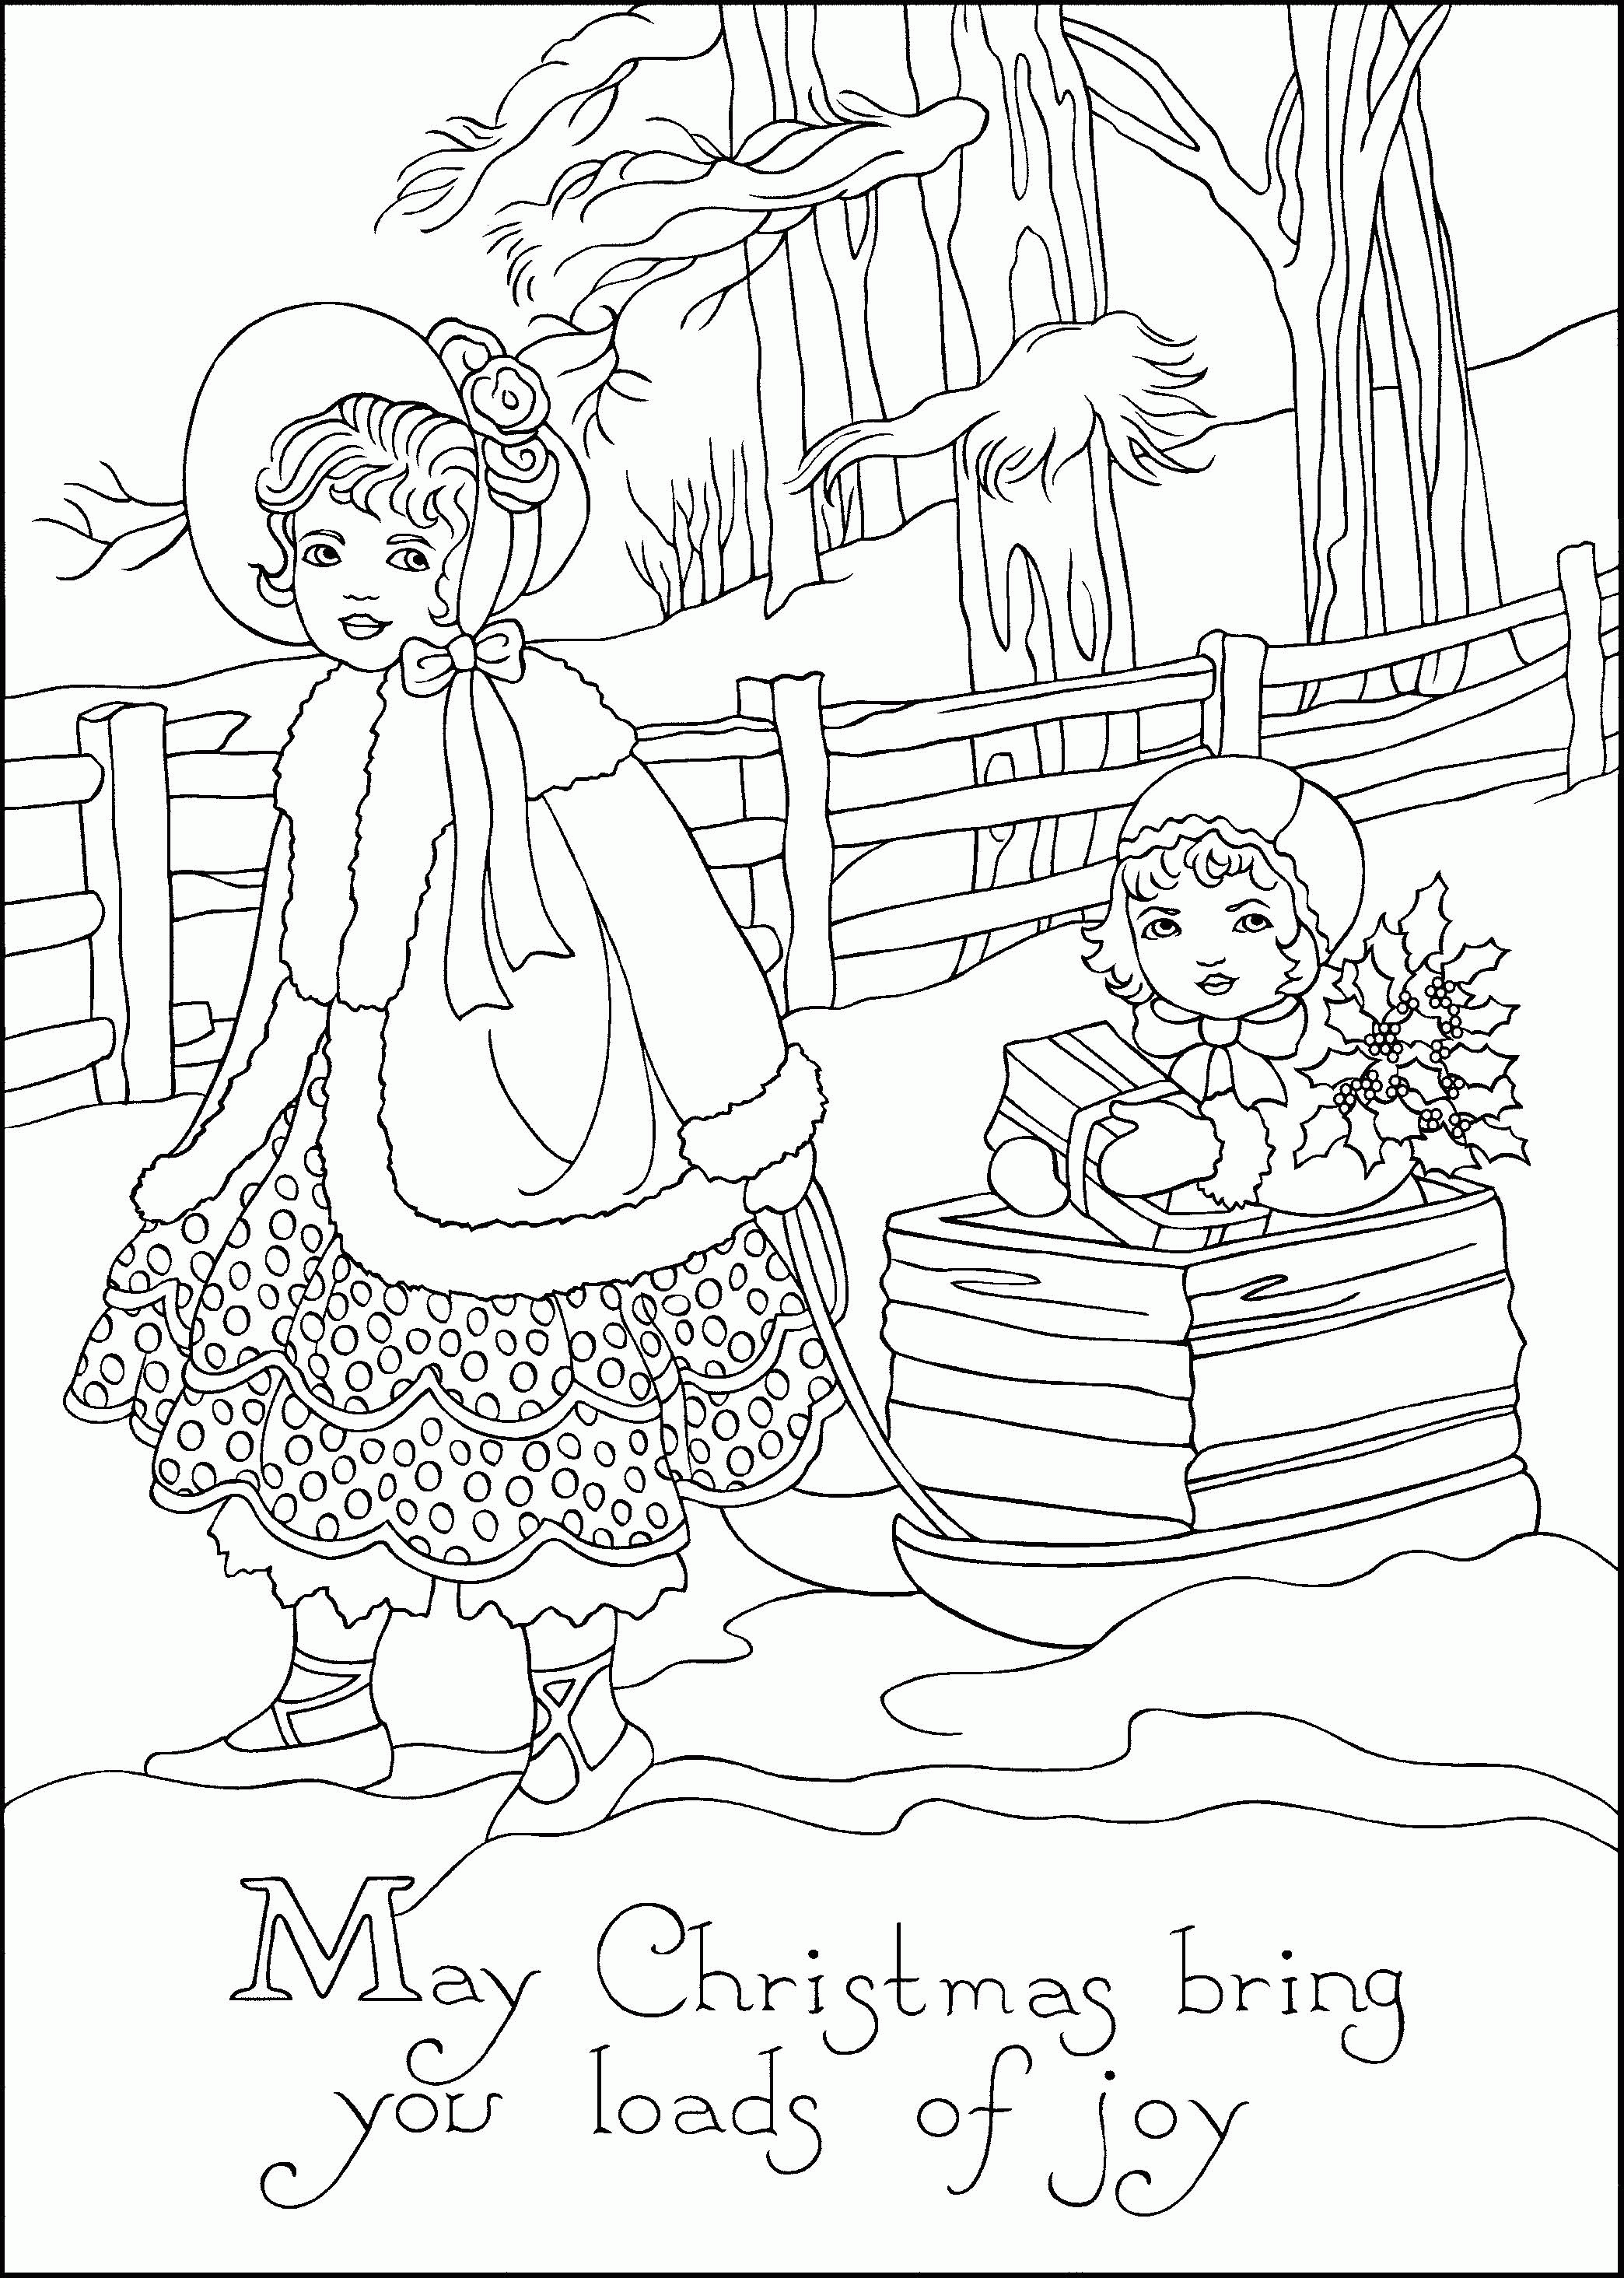 Coloring Pages for Adults | Faber-Castell